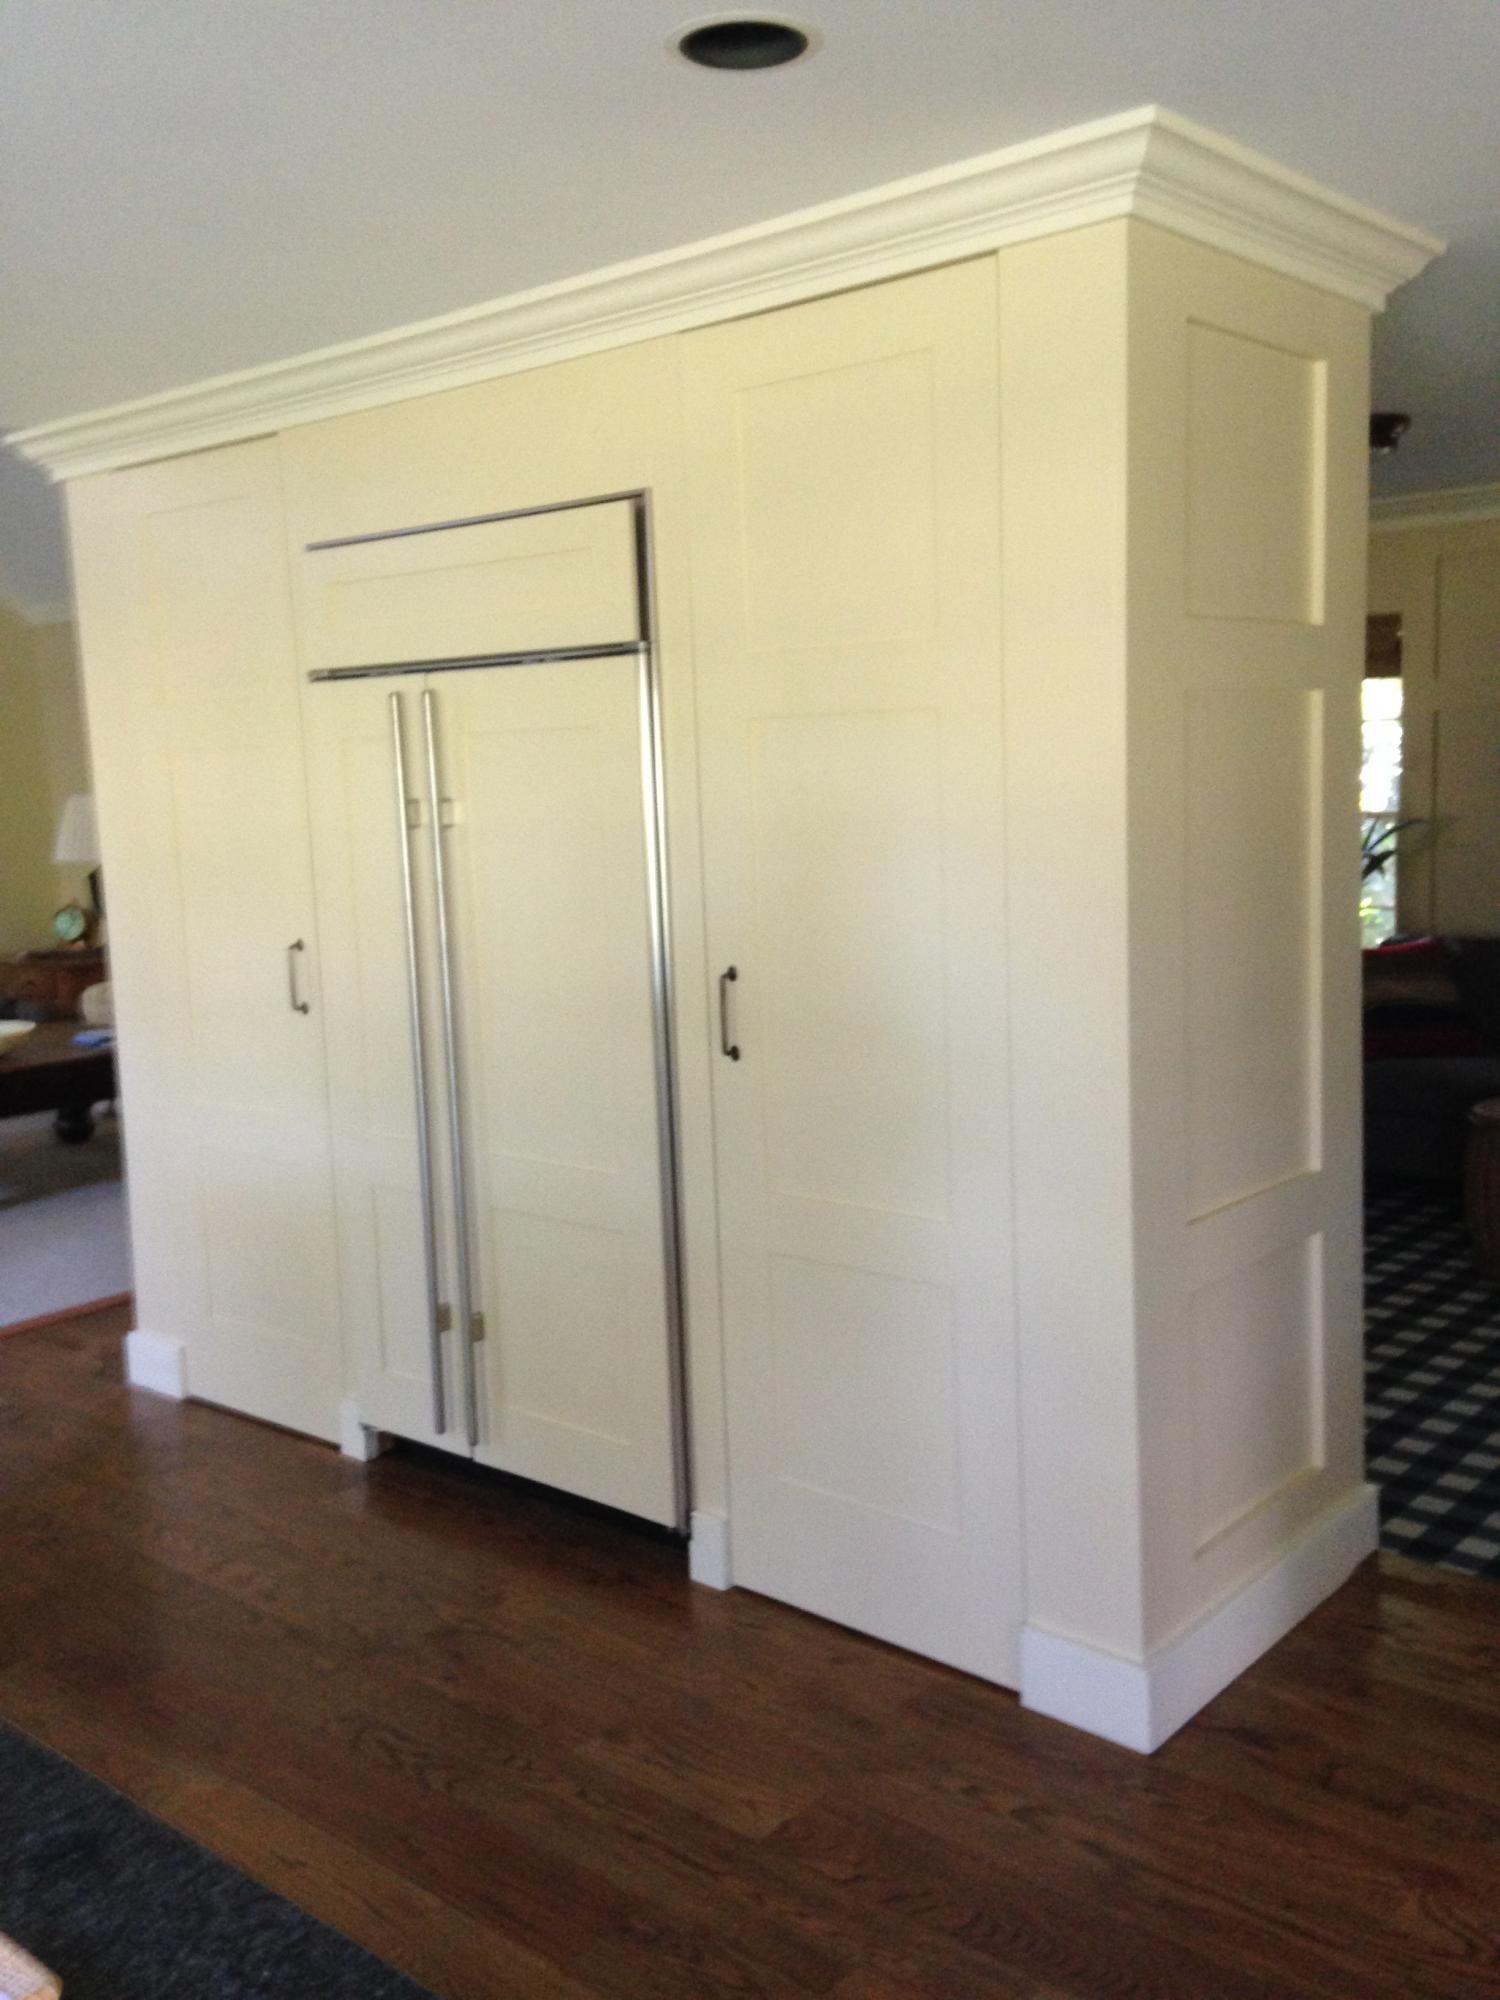 Fabricated and installed paneling on sub zero refrigerator and doors of pantry flanking either side